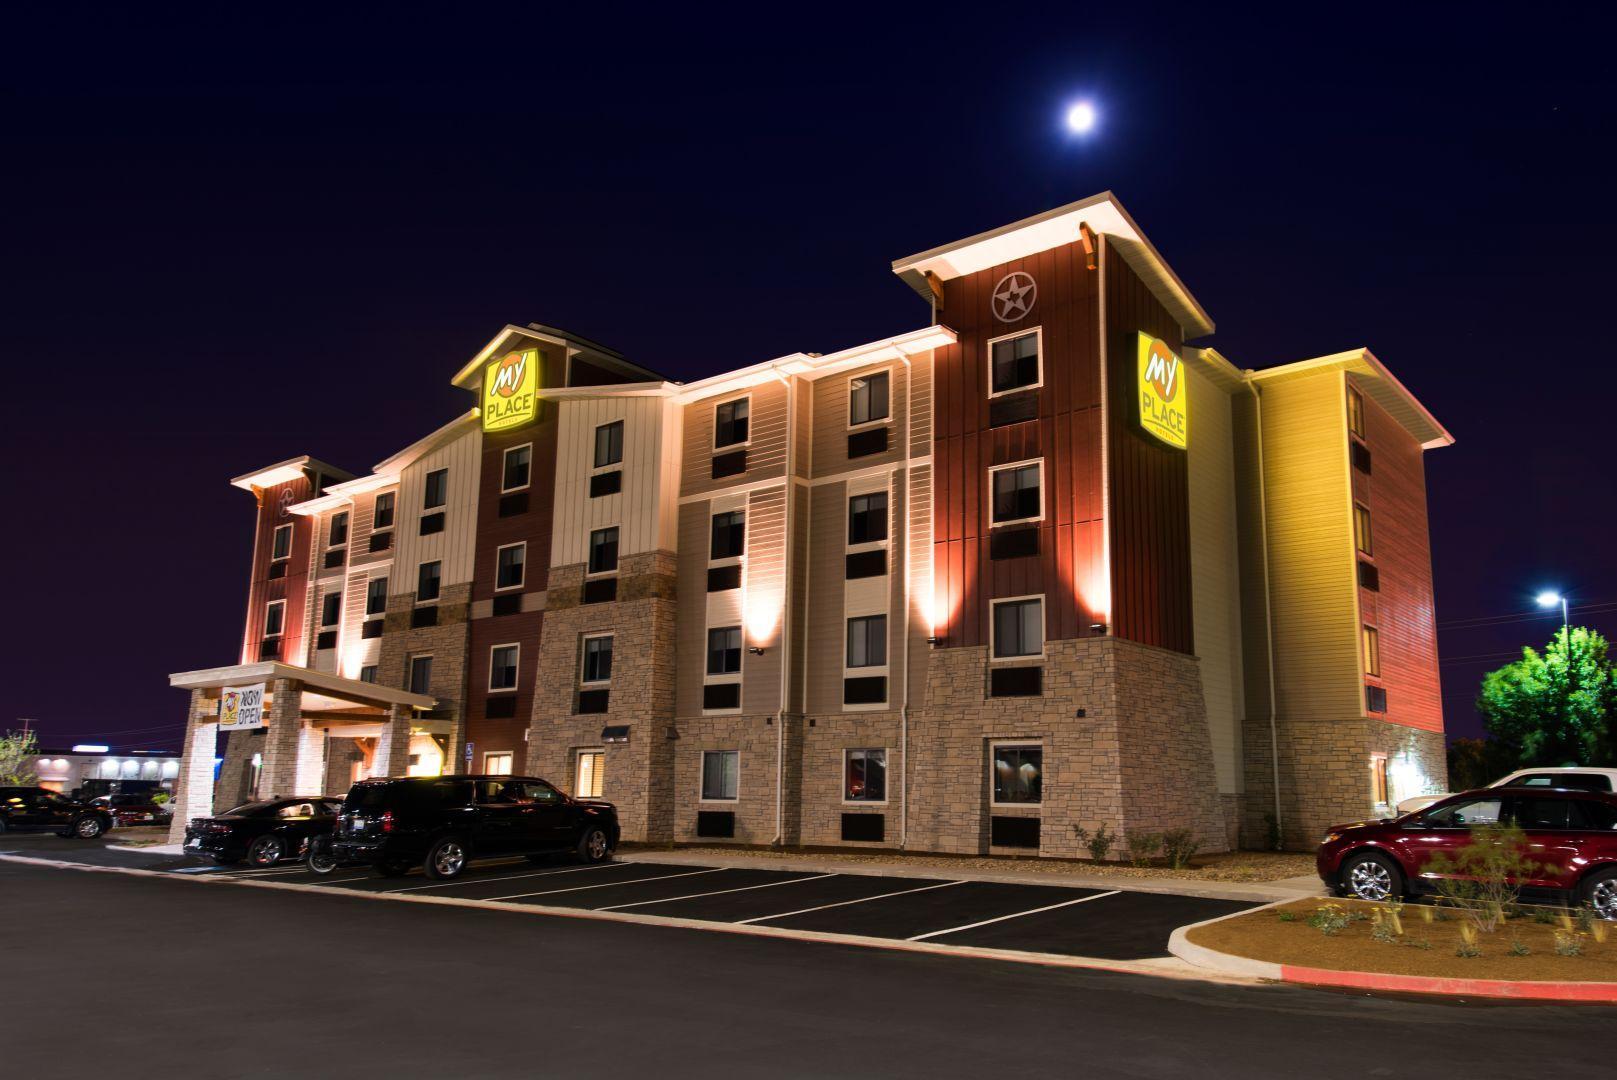 My Place Hotel-Fargo, ND image